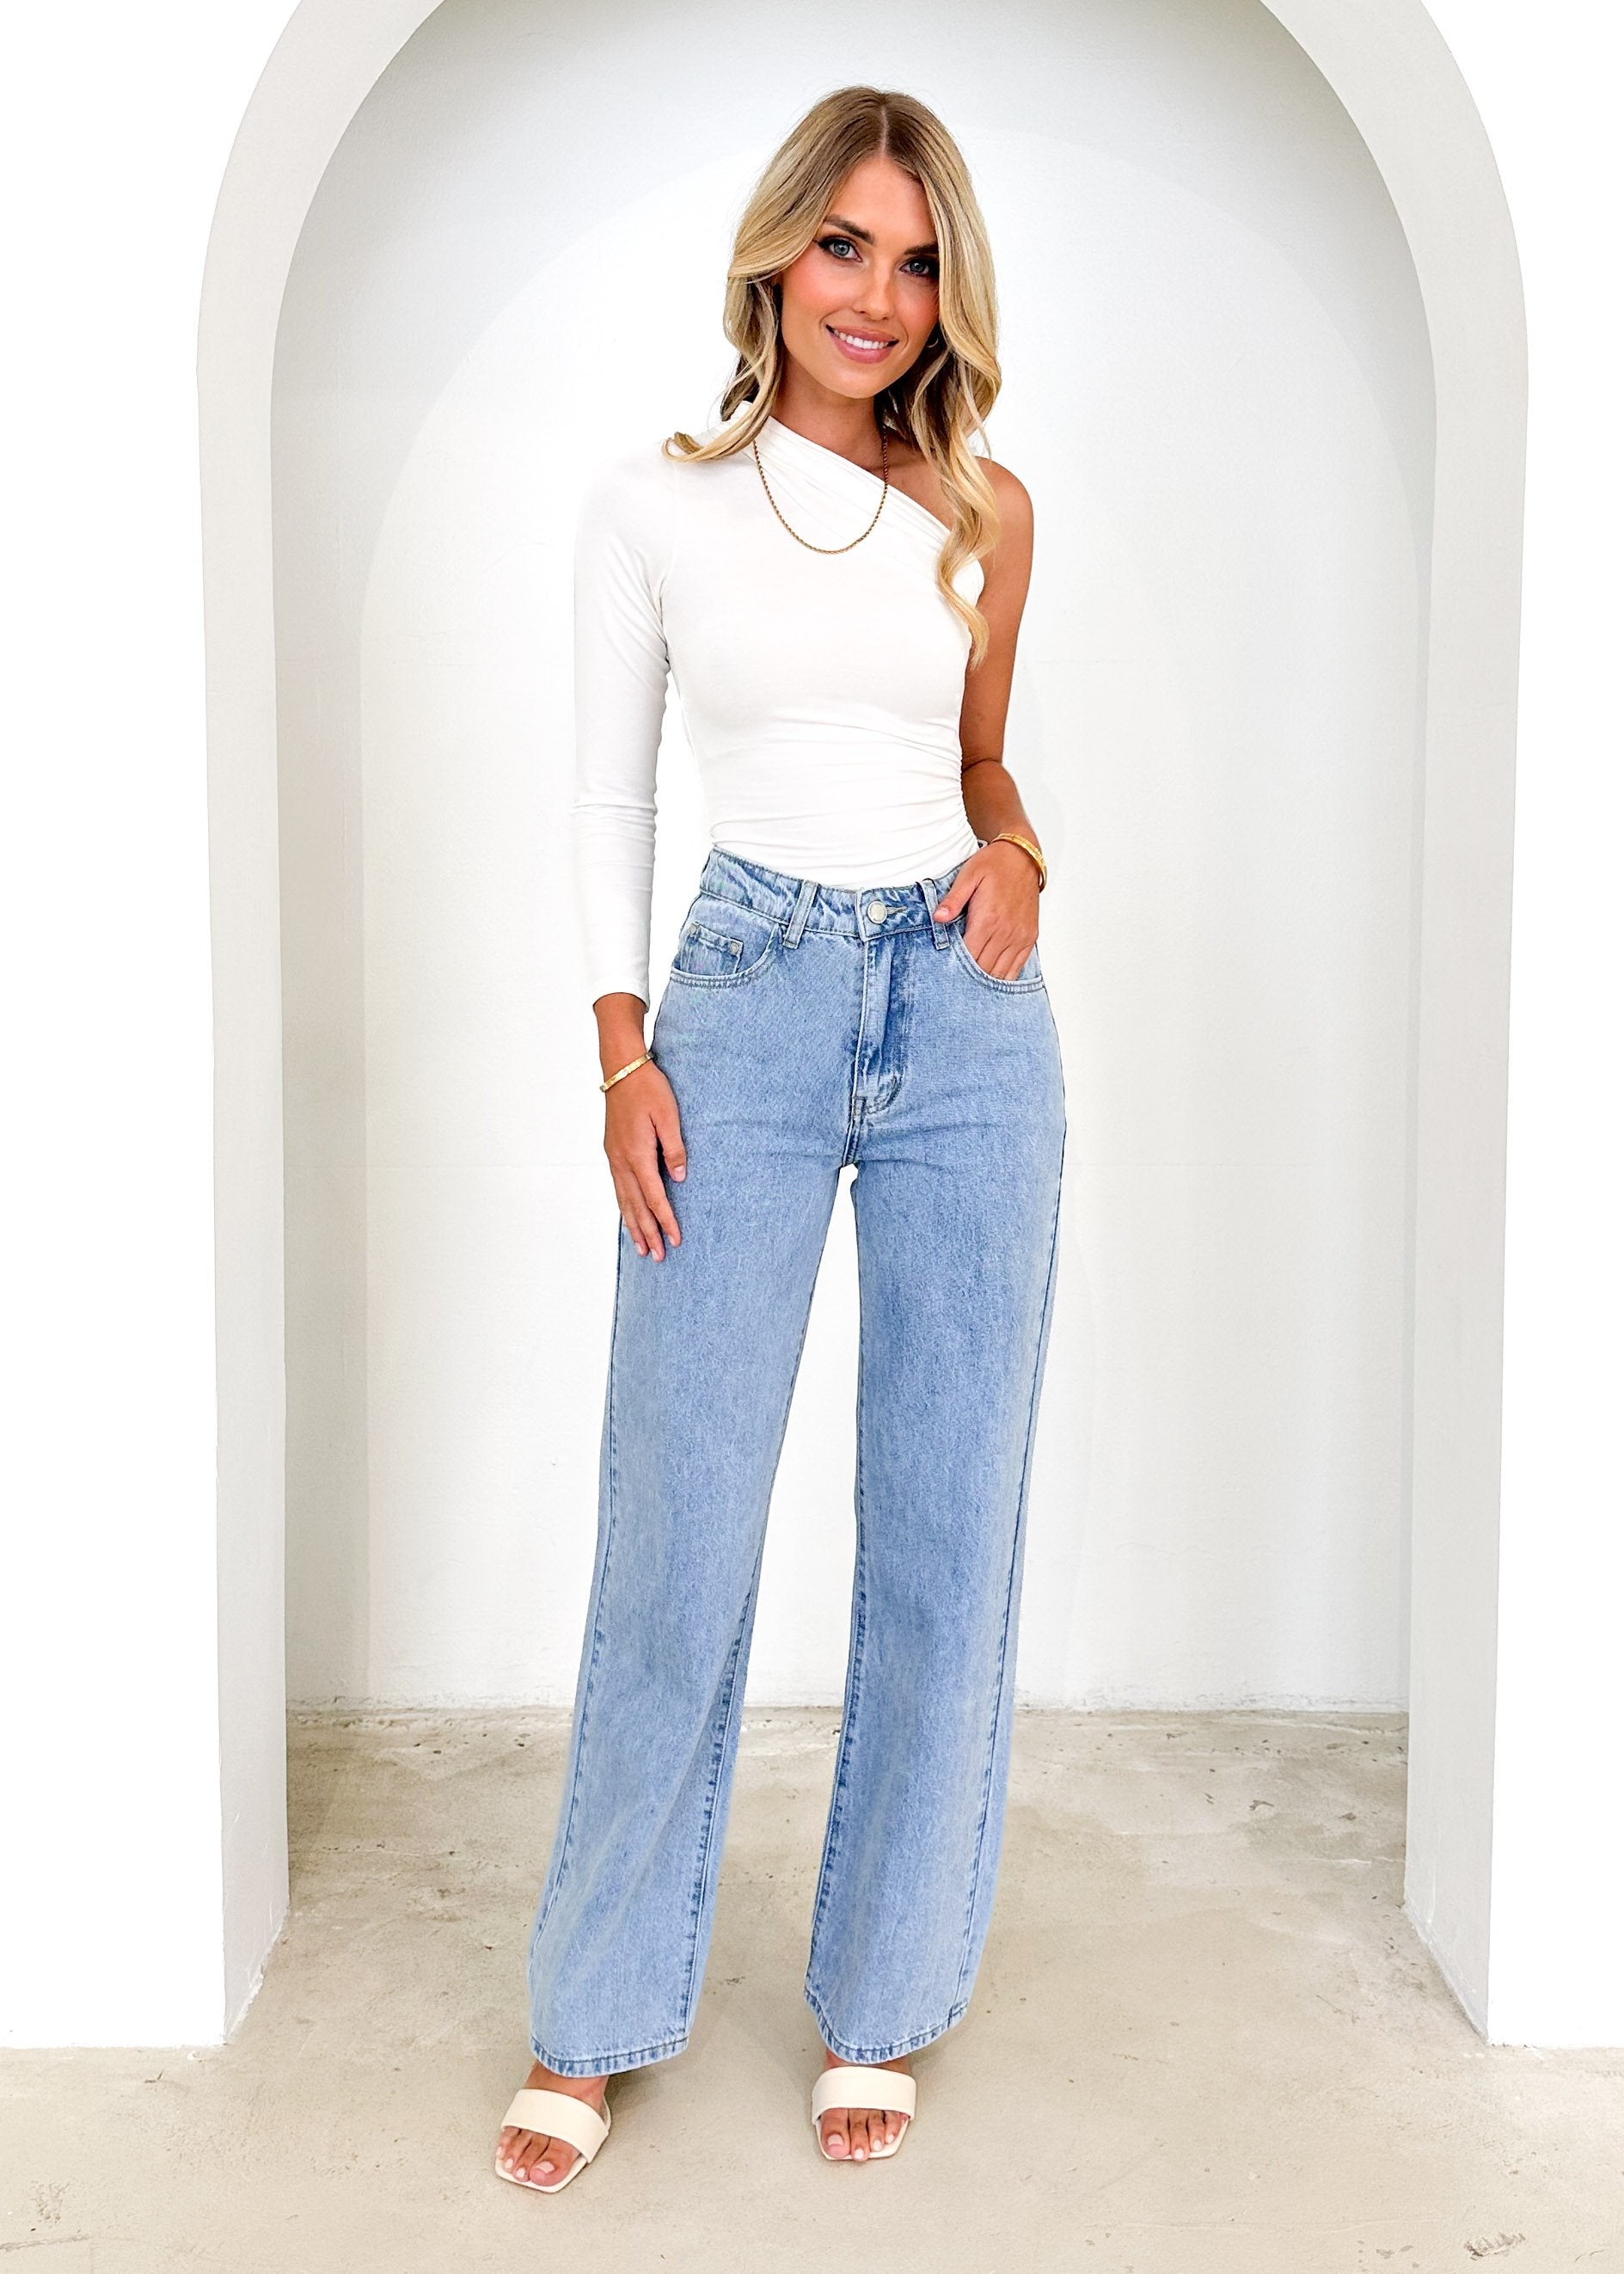 Laytra Jeans - Light Blue